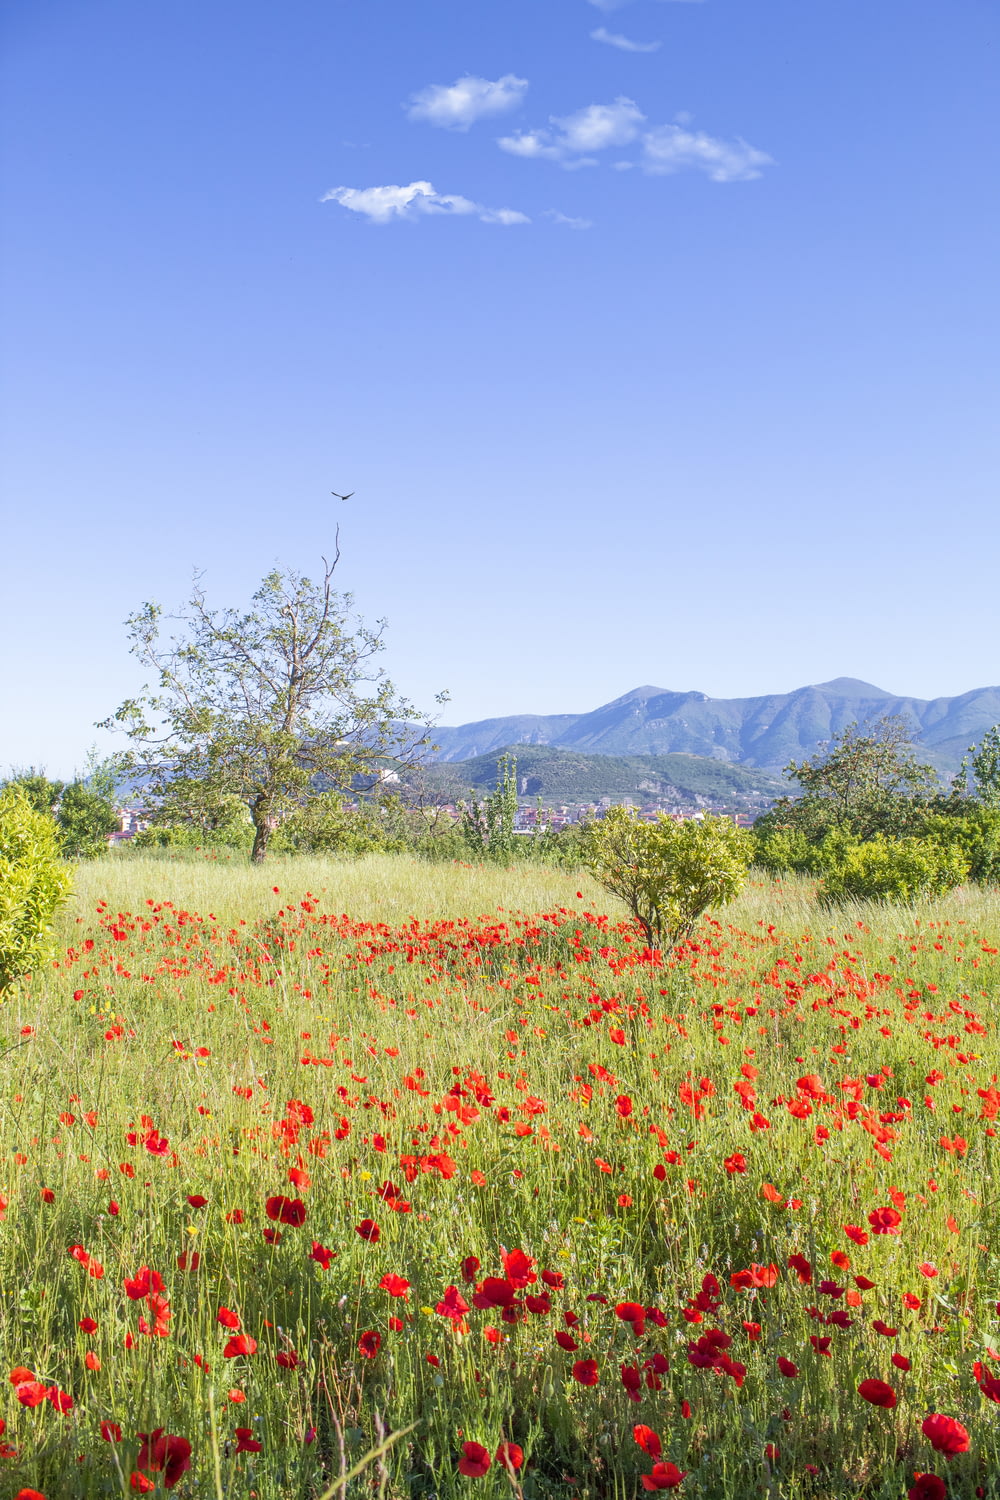 red flower field near green trees and mountain during daytime